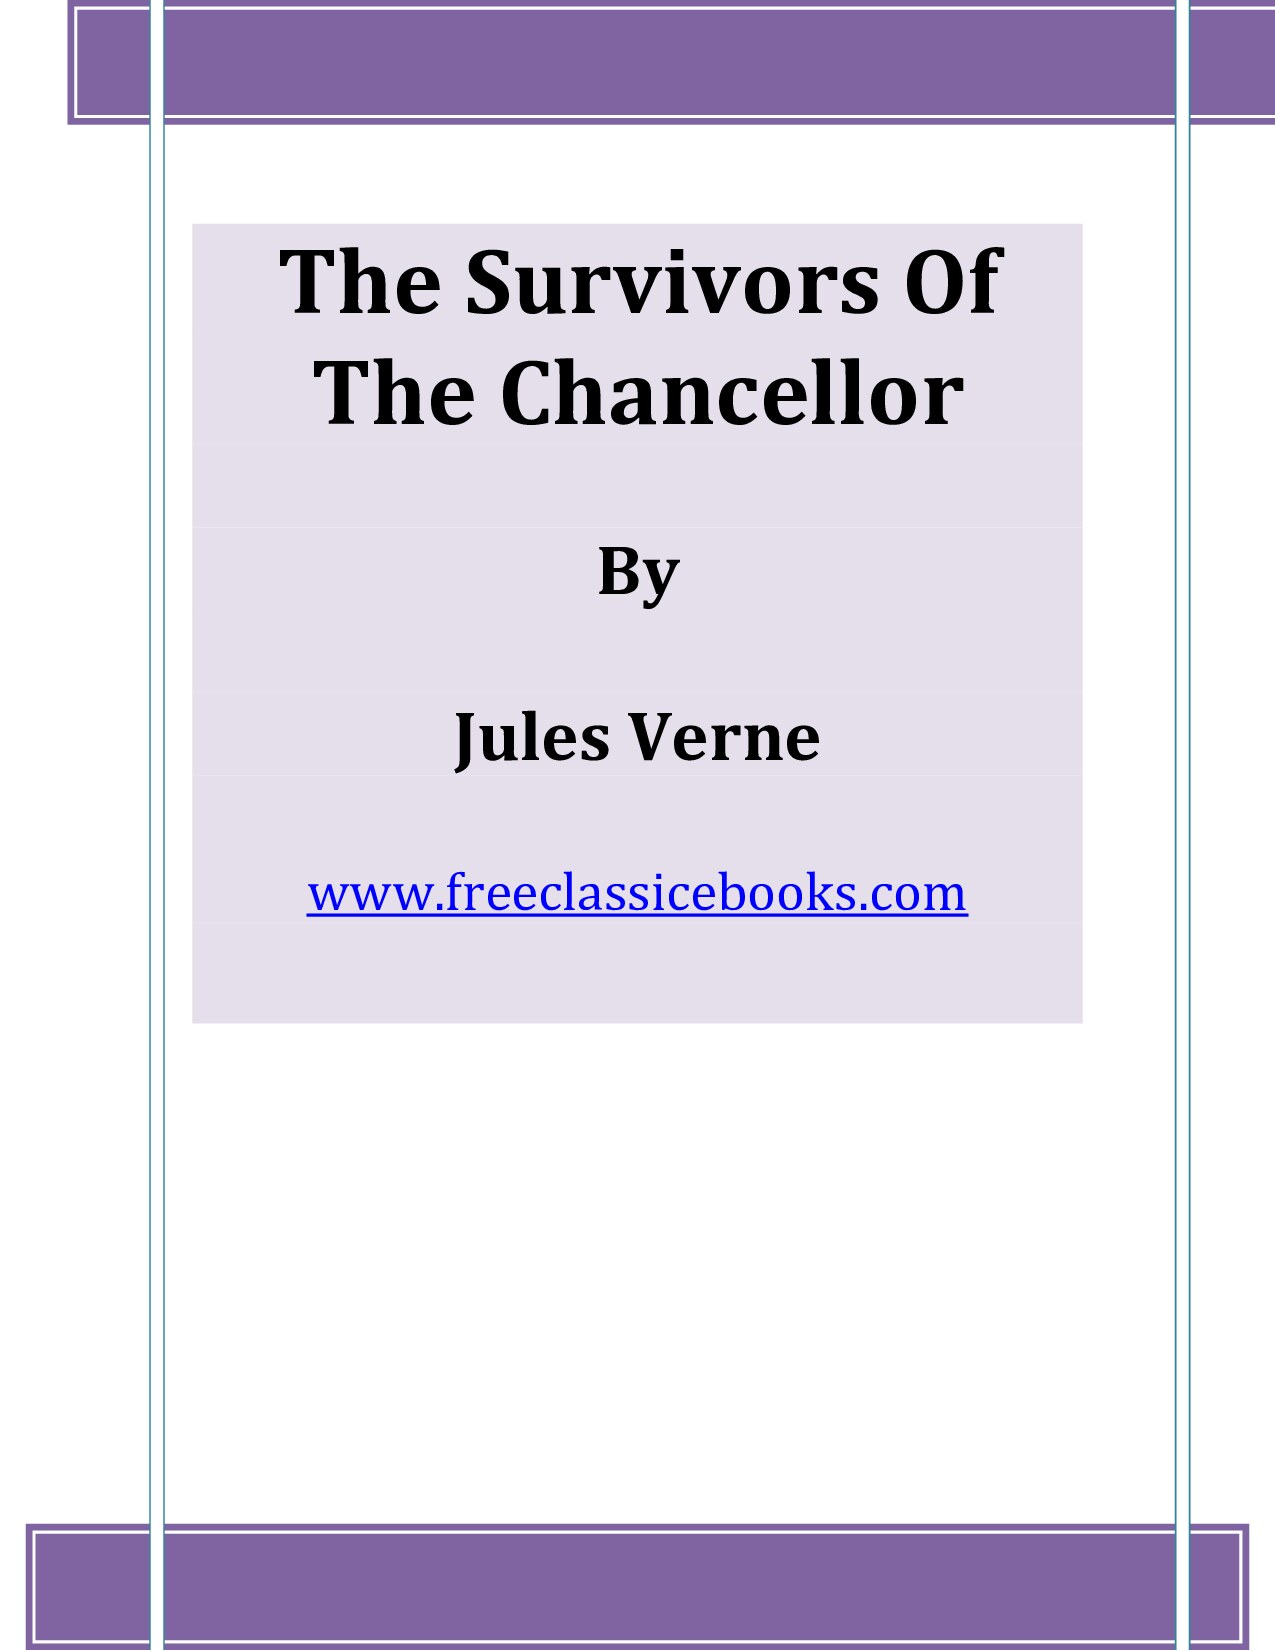 Microsoft Word - The Survivors Of The Chancellor.doc